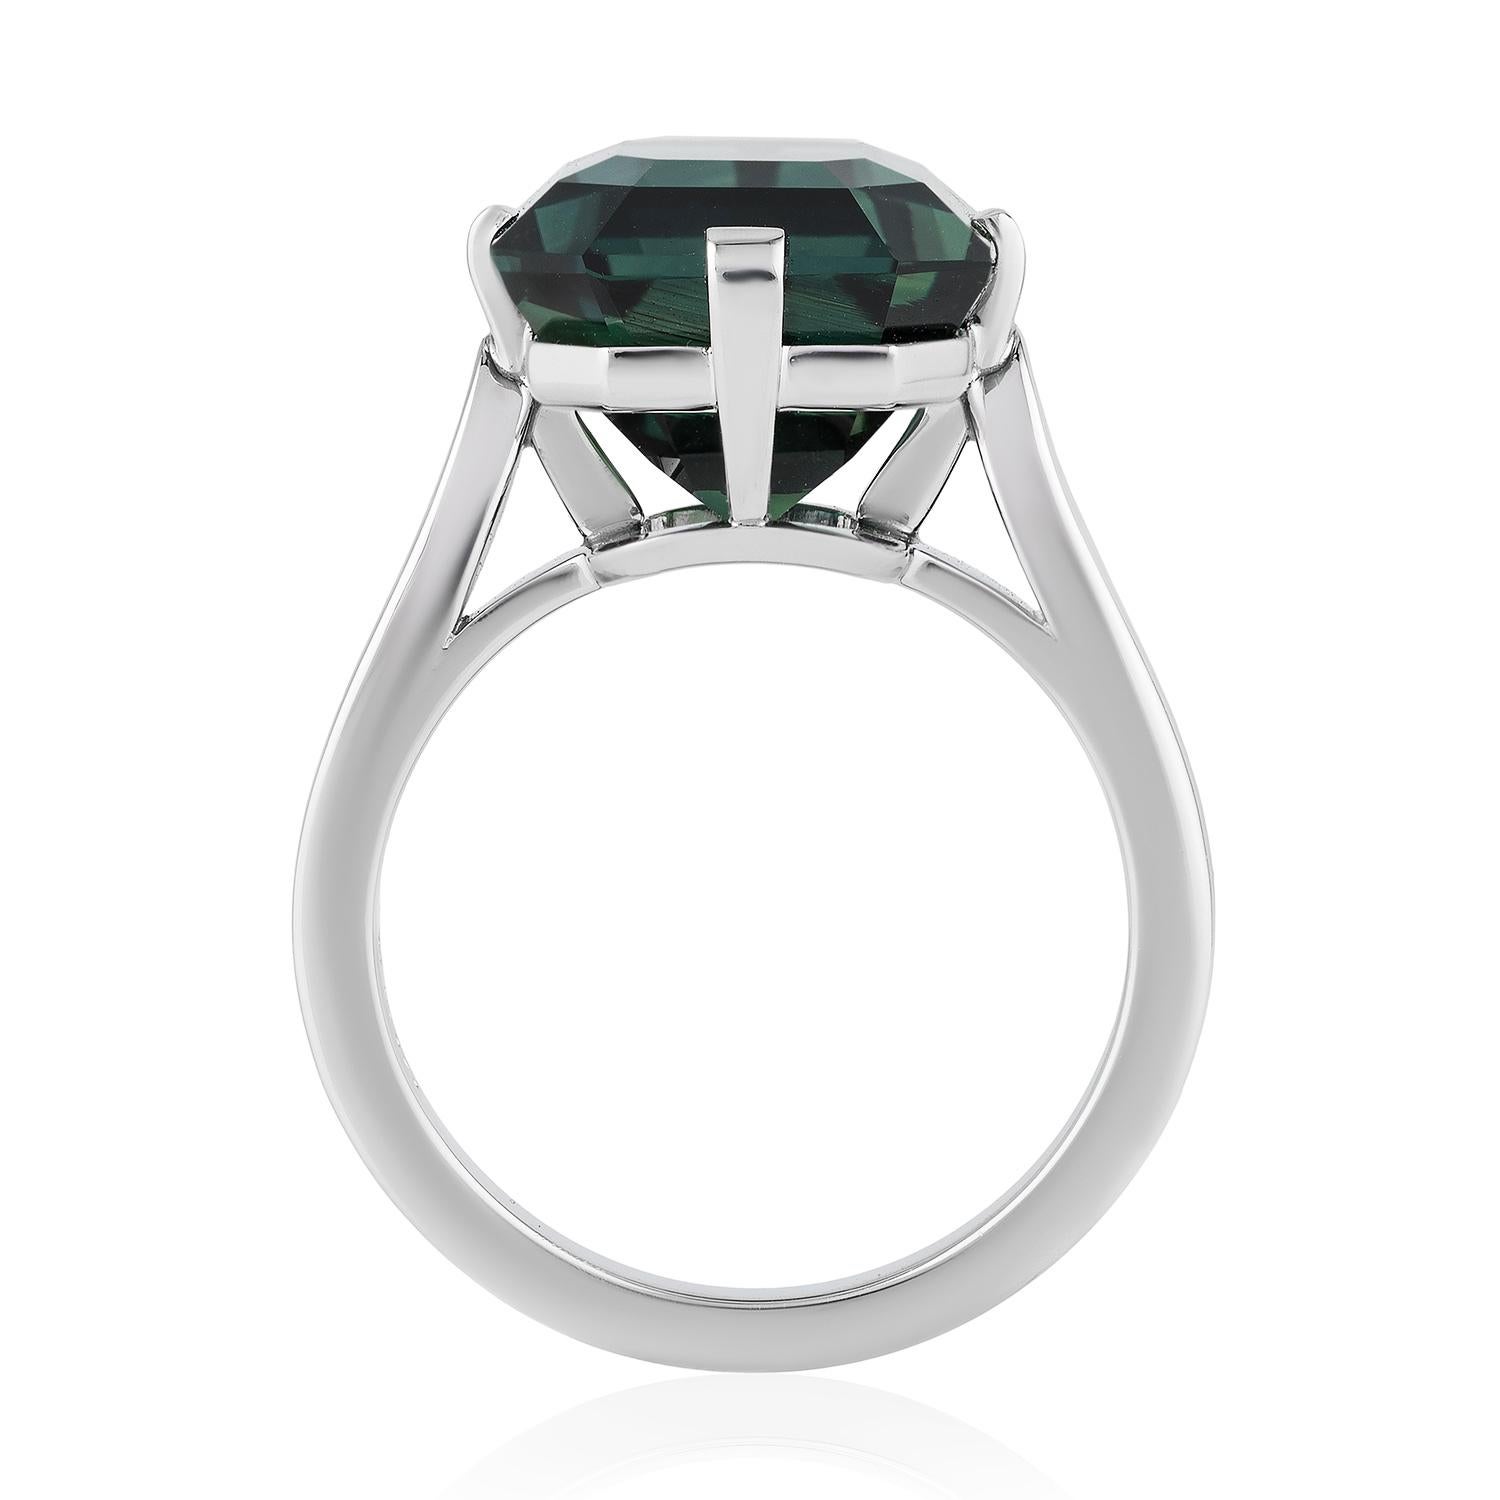 A Platinum ring centered upon a 10.42 carat natural unheated emerald-cut green sapphire, certified by C. Dunaigre Consulting.

Finding the right melange of colors is the skill of a master artist. The Chic Collection jewels are a kaleidoscope of